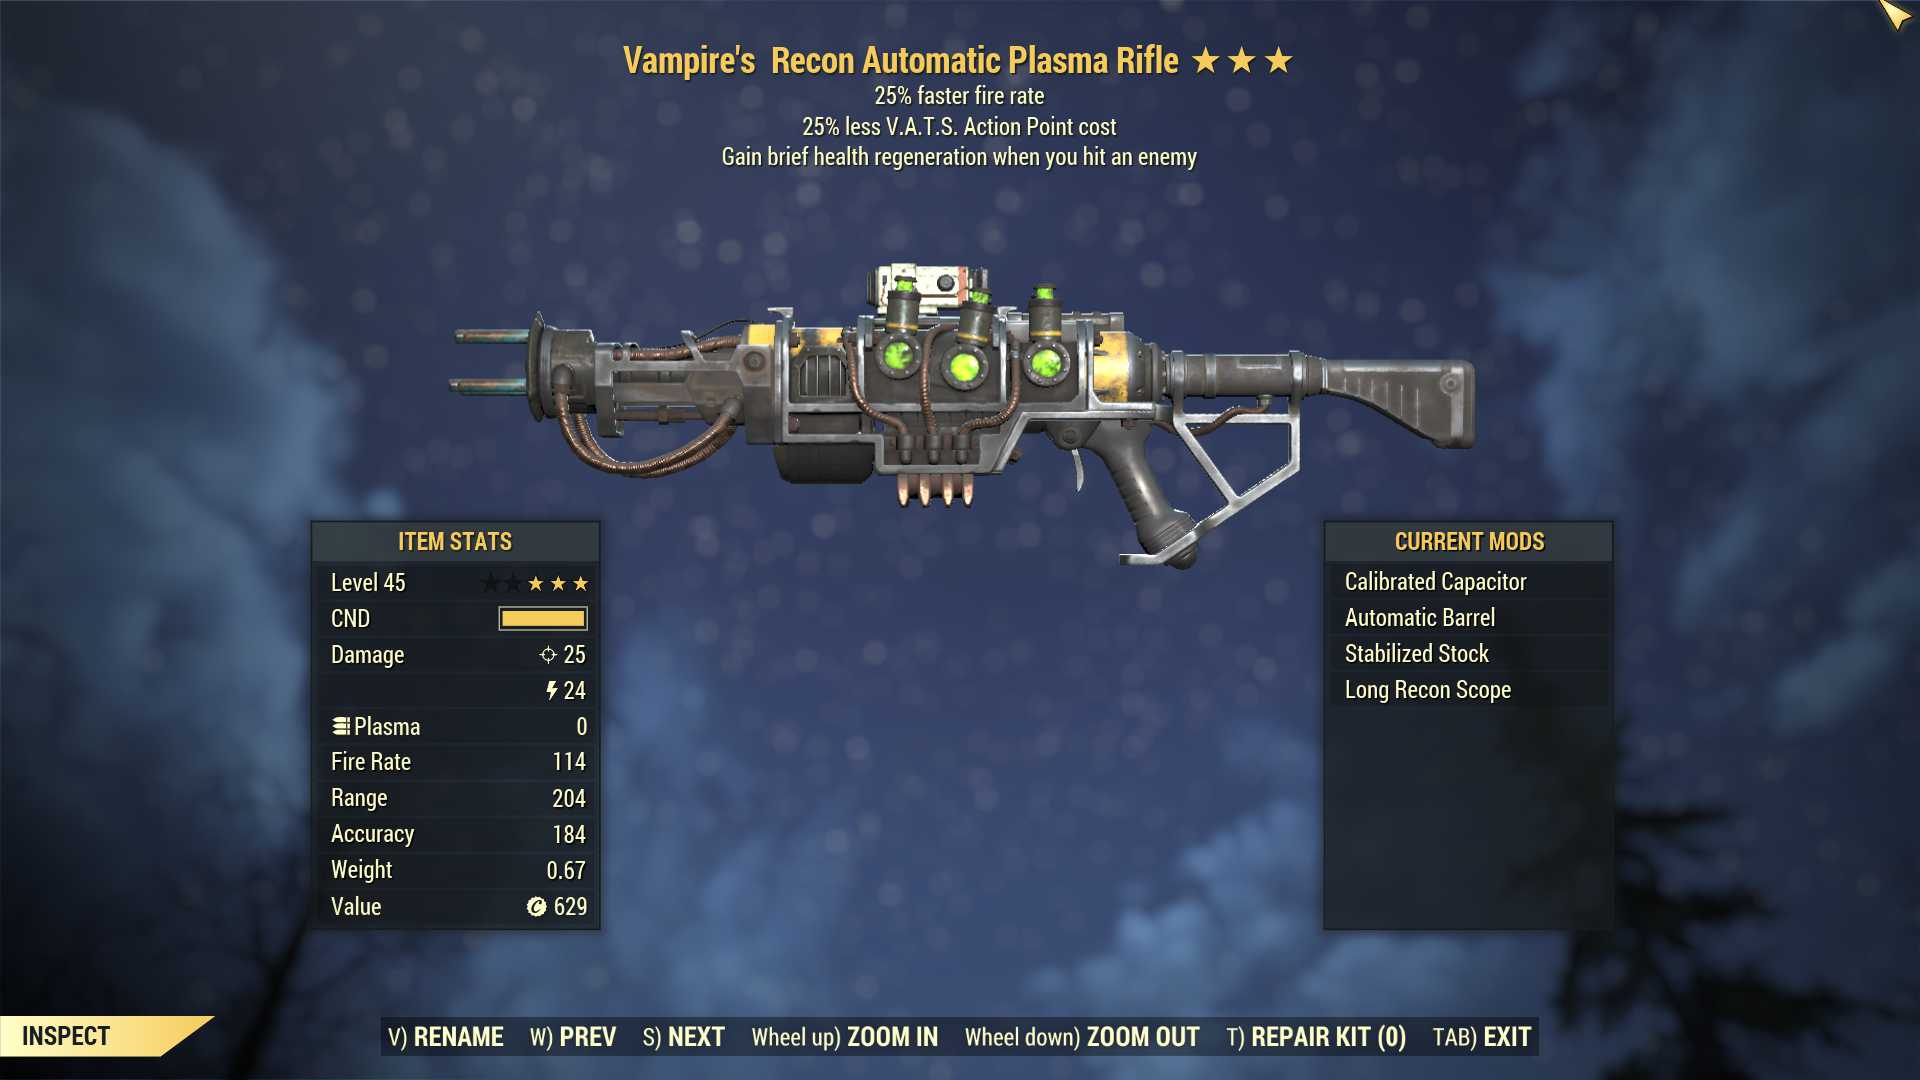 Vampire's Plasma rifle (25% faster fire rate, 25% less VATS AP cost)